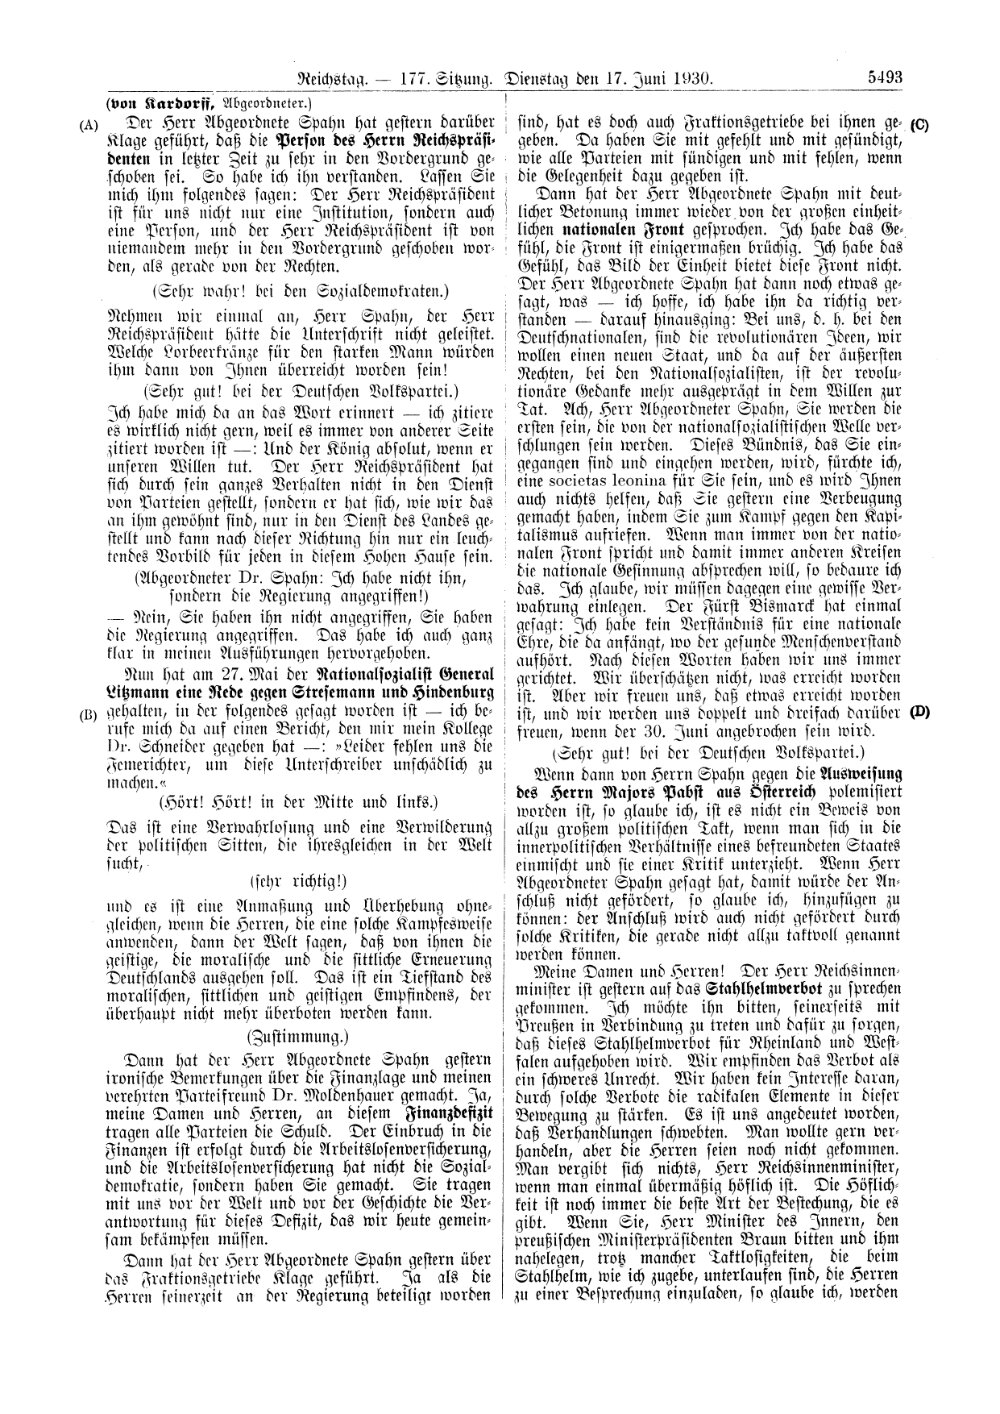 Scan of page 5493